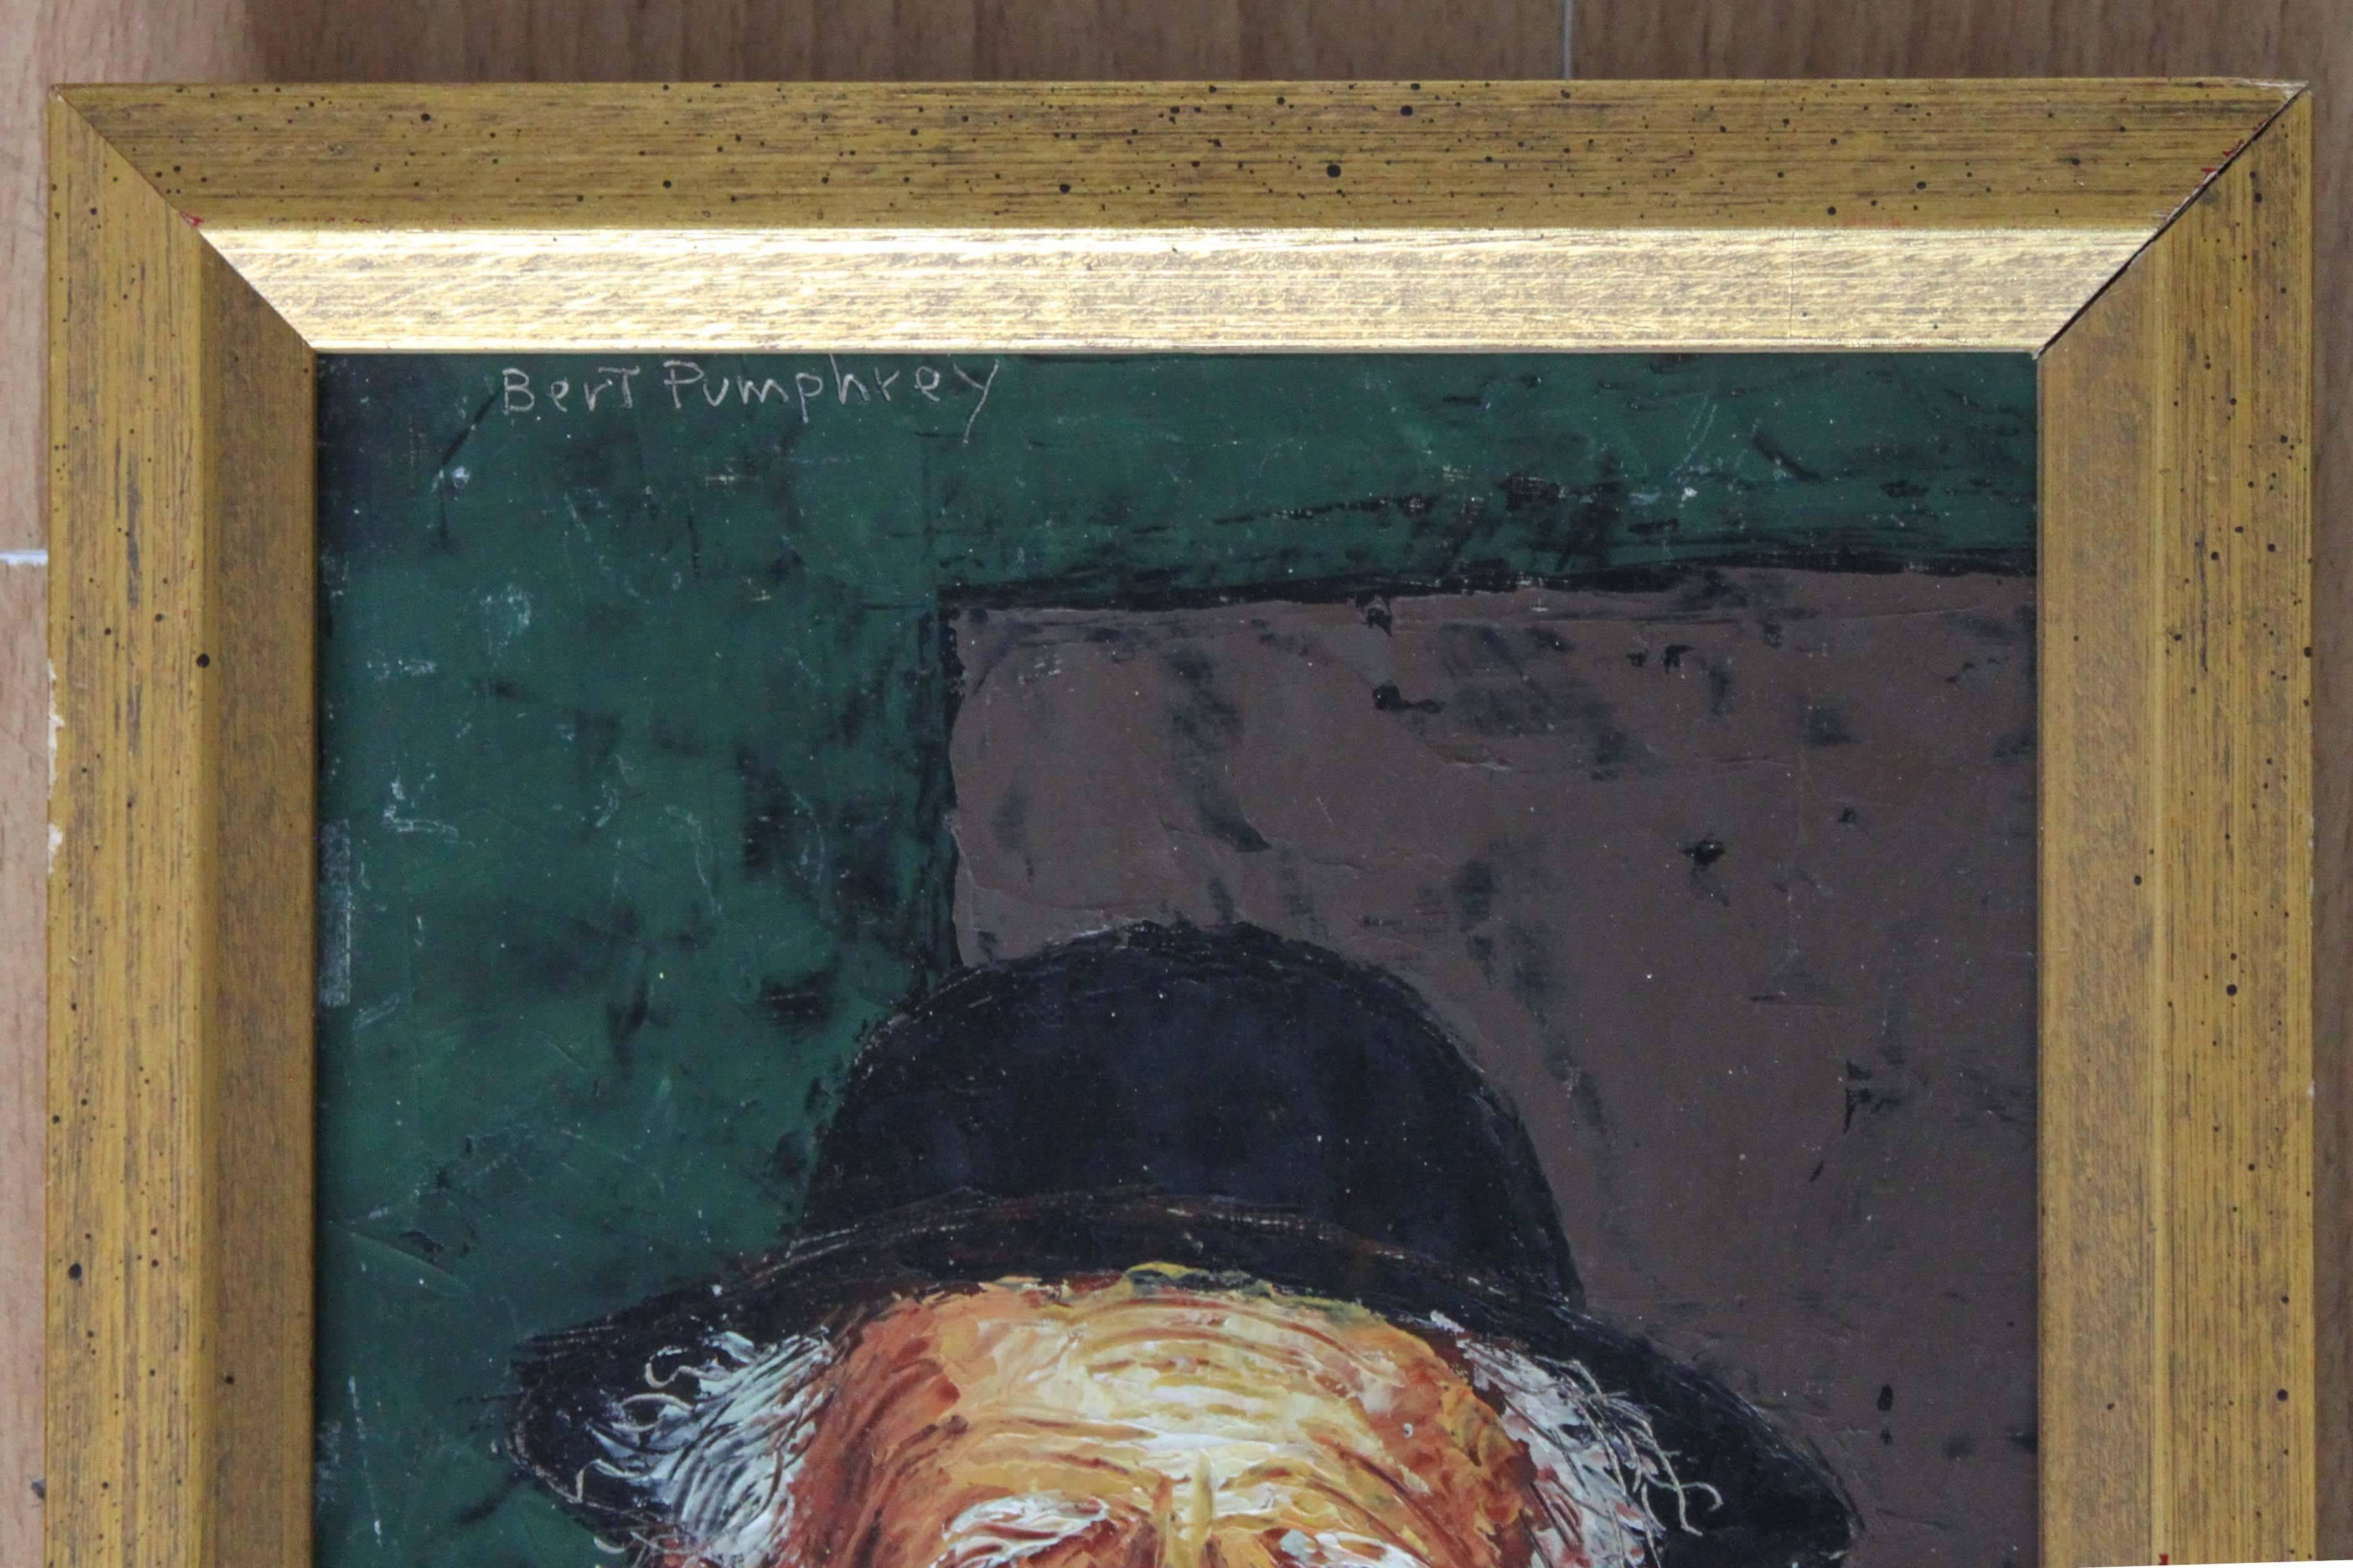 Vintage painting signed Bert Pumphrey entitled "Hasidic". Oil on board dated April 1970, San Francisco, as pictured.